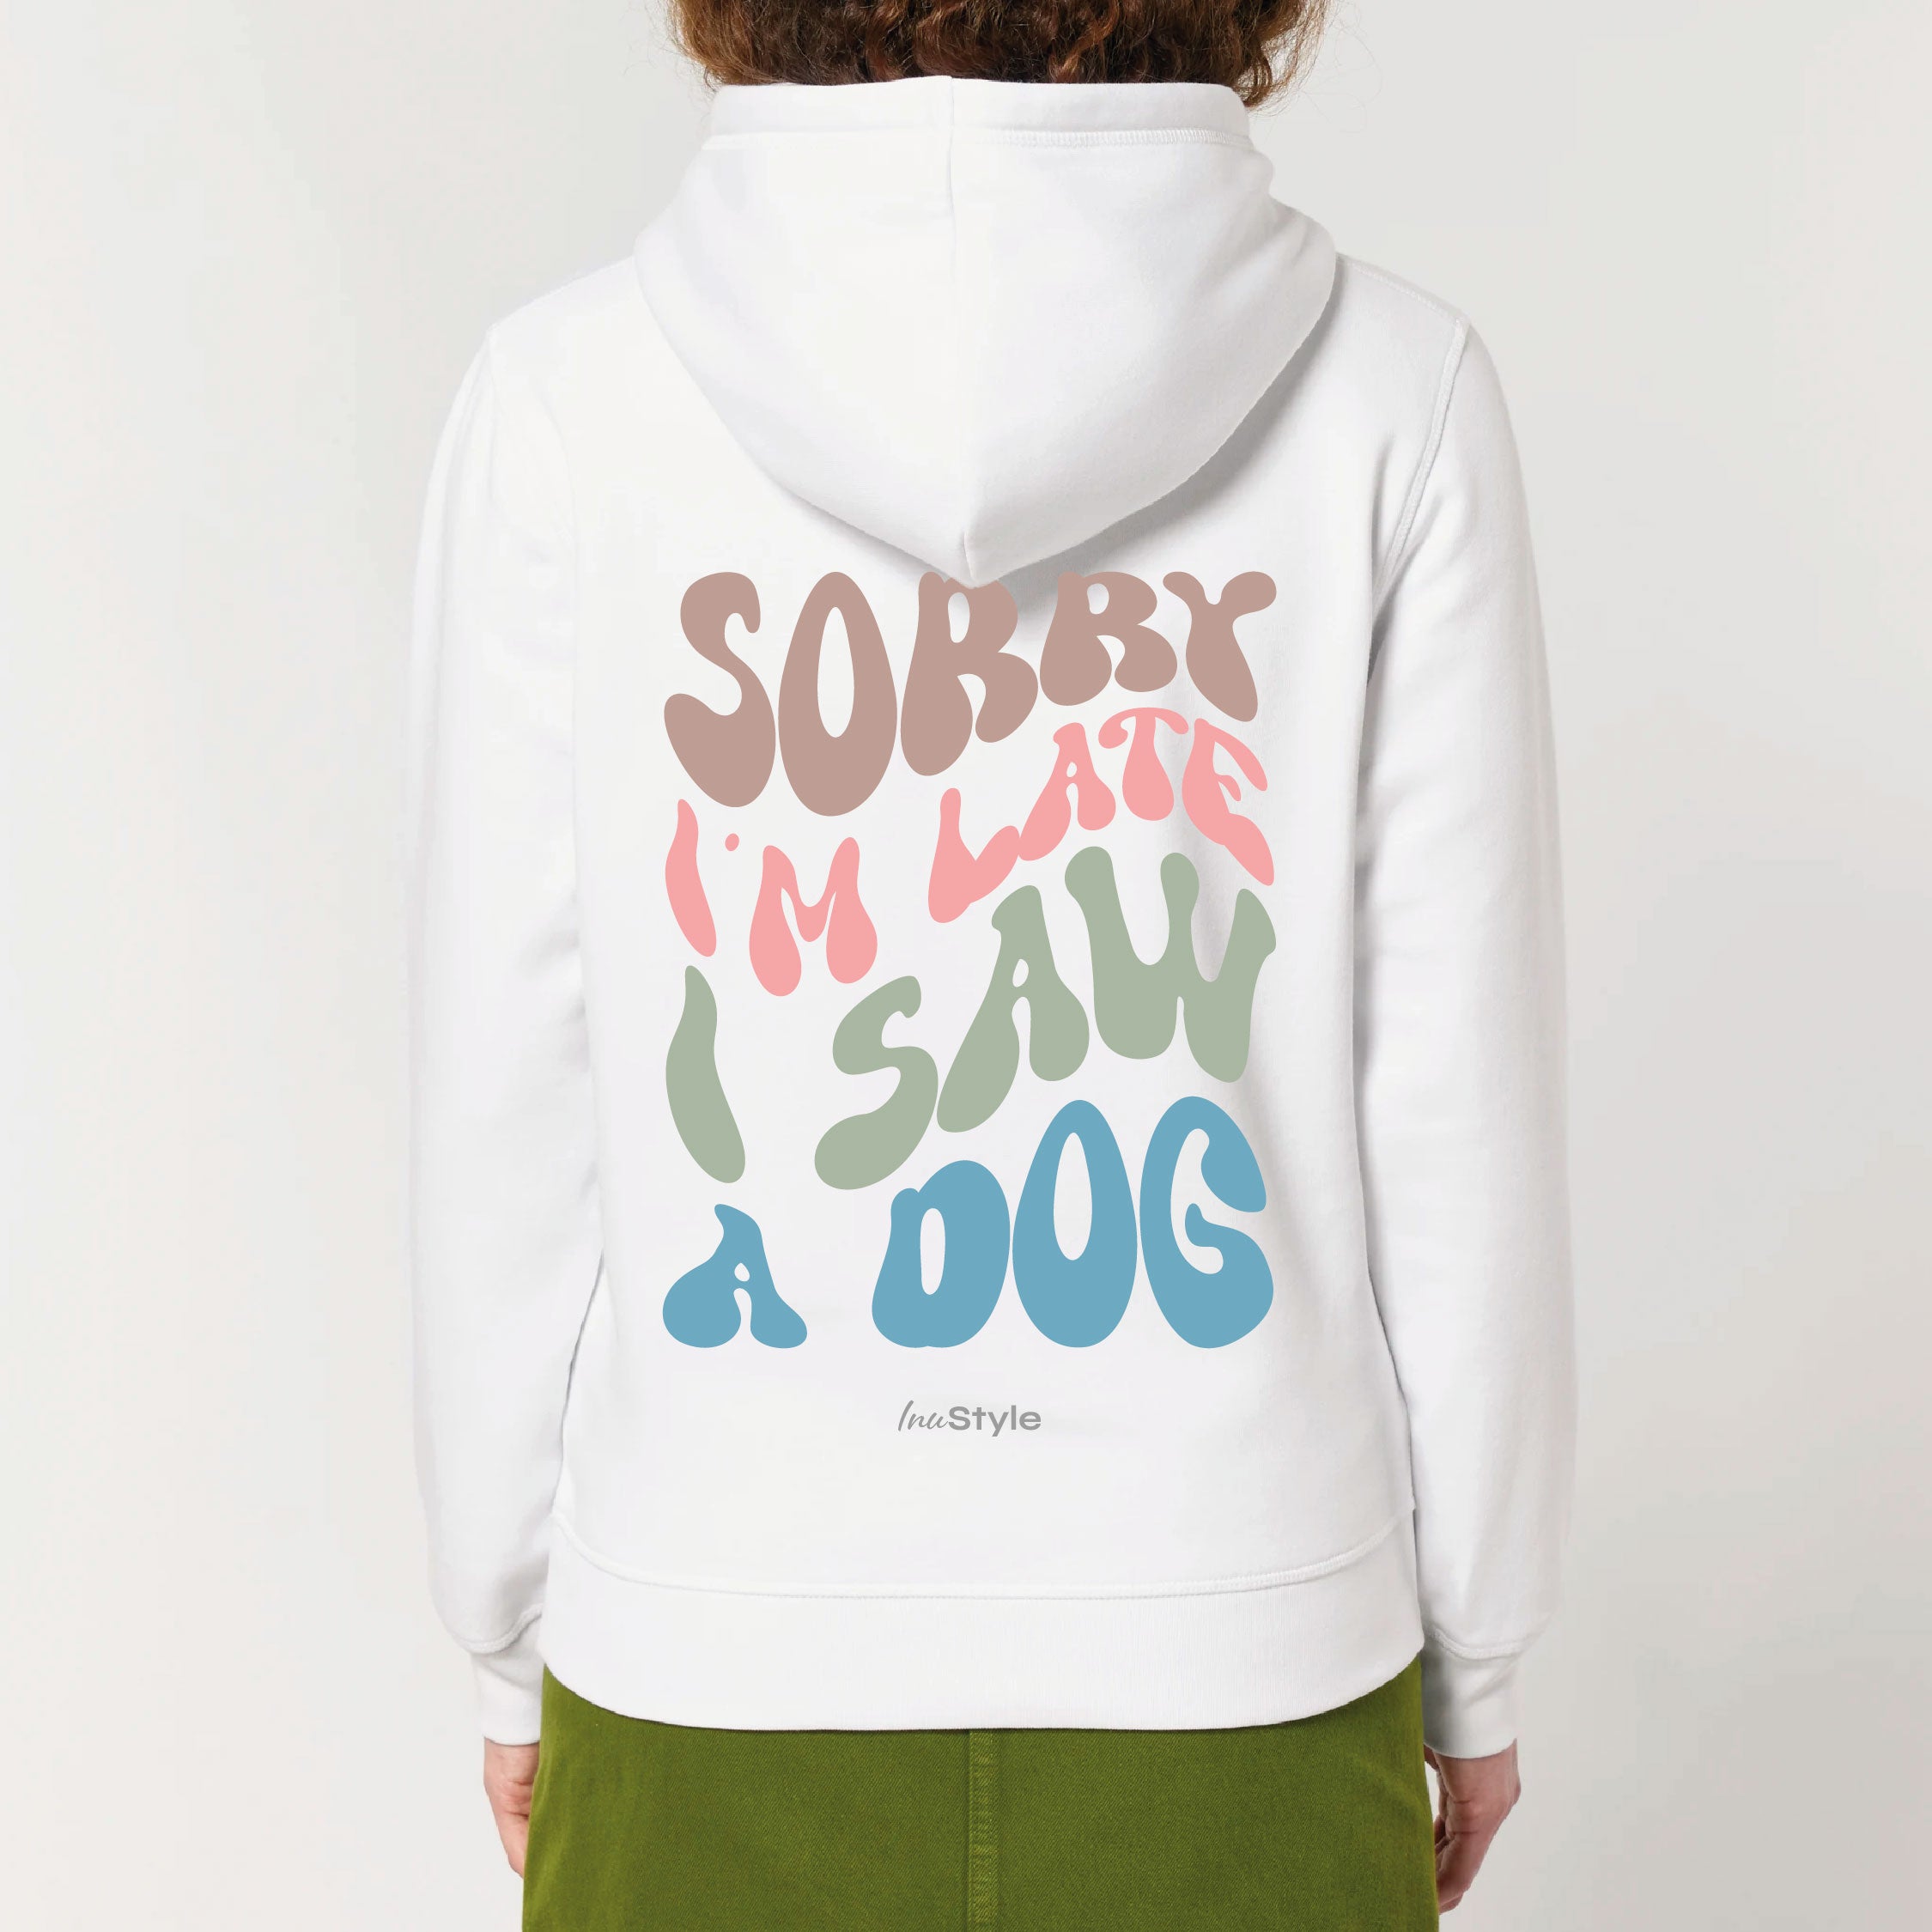 New Inu.style Collection - Sorry I am late. I saw a DOG - Hoodie